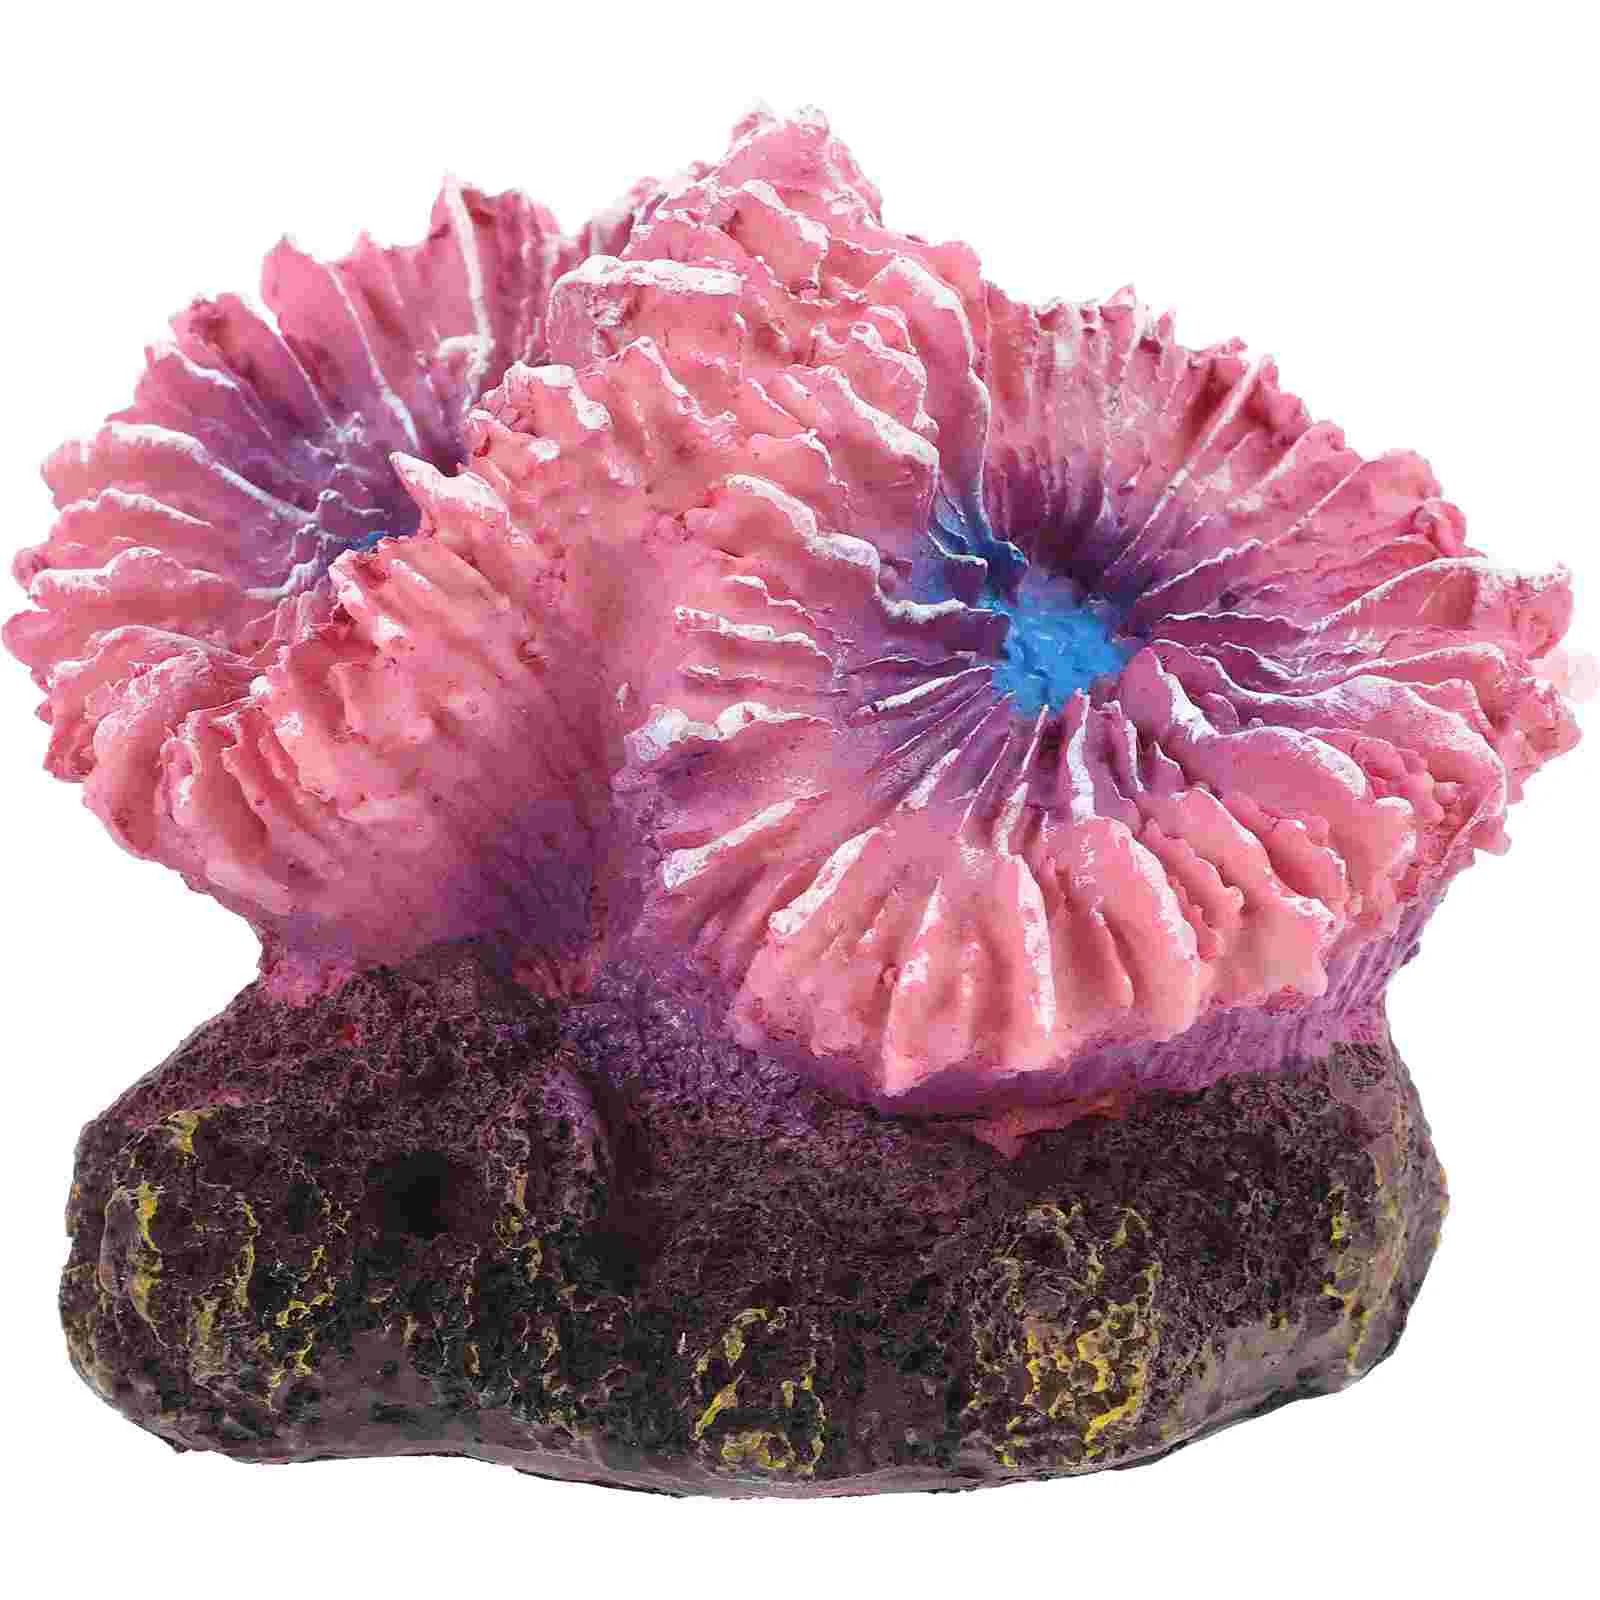 

Simulated Coral Landscaping Reef Decor Ornaments Aquarium For Home Accessories Fish Tank Supplies Resin Fake Decoration The